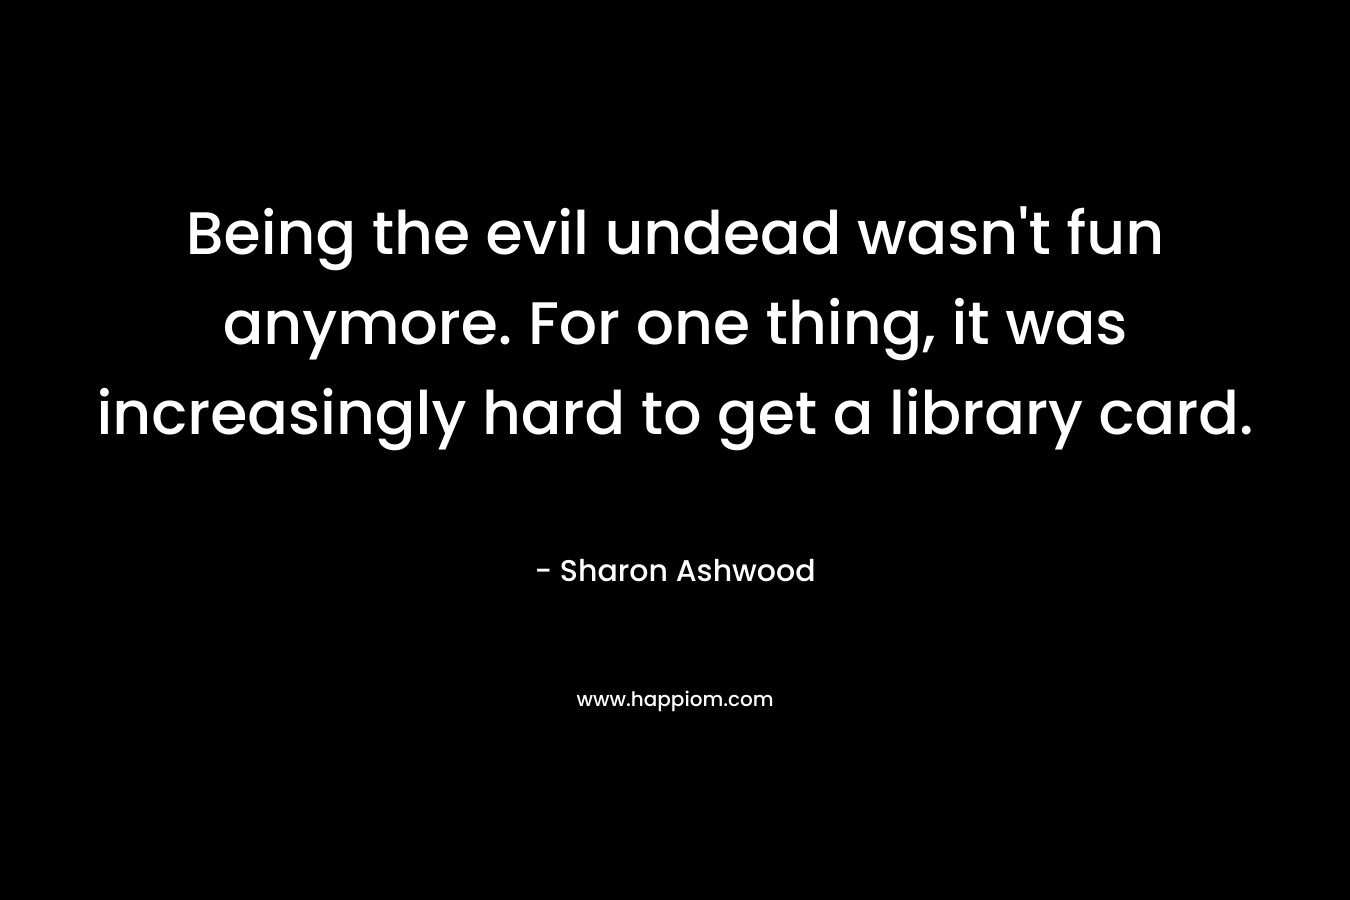 Being the evil undead wasn’t fun anymore. For one thing, it was increasingly hard to get a library card. – Sharon Ashwood